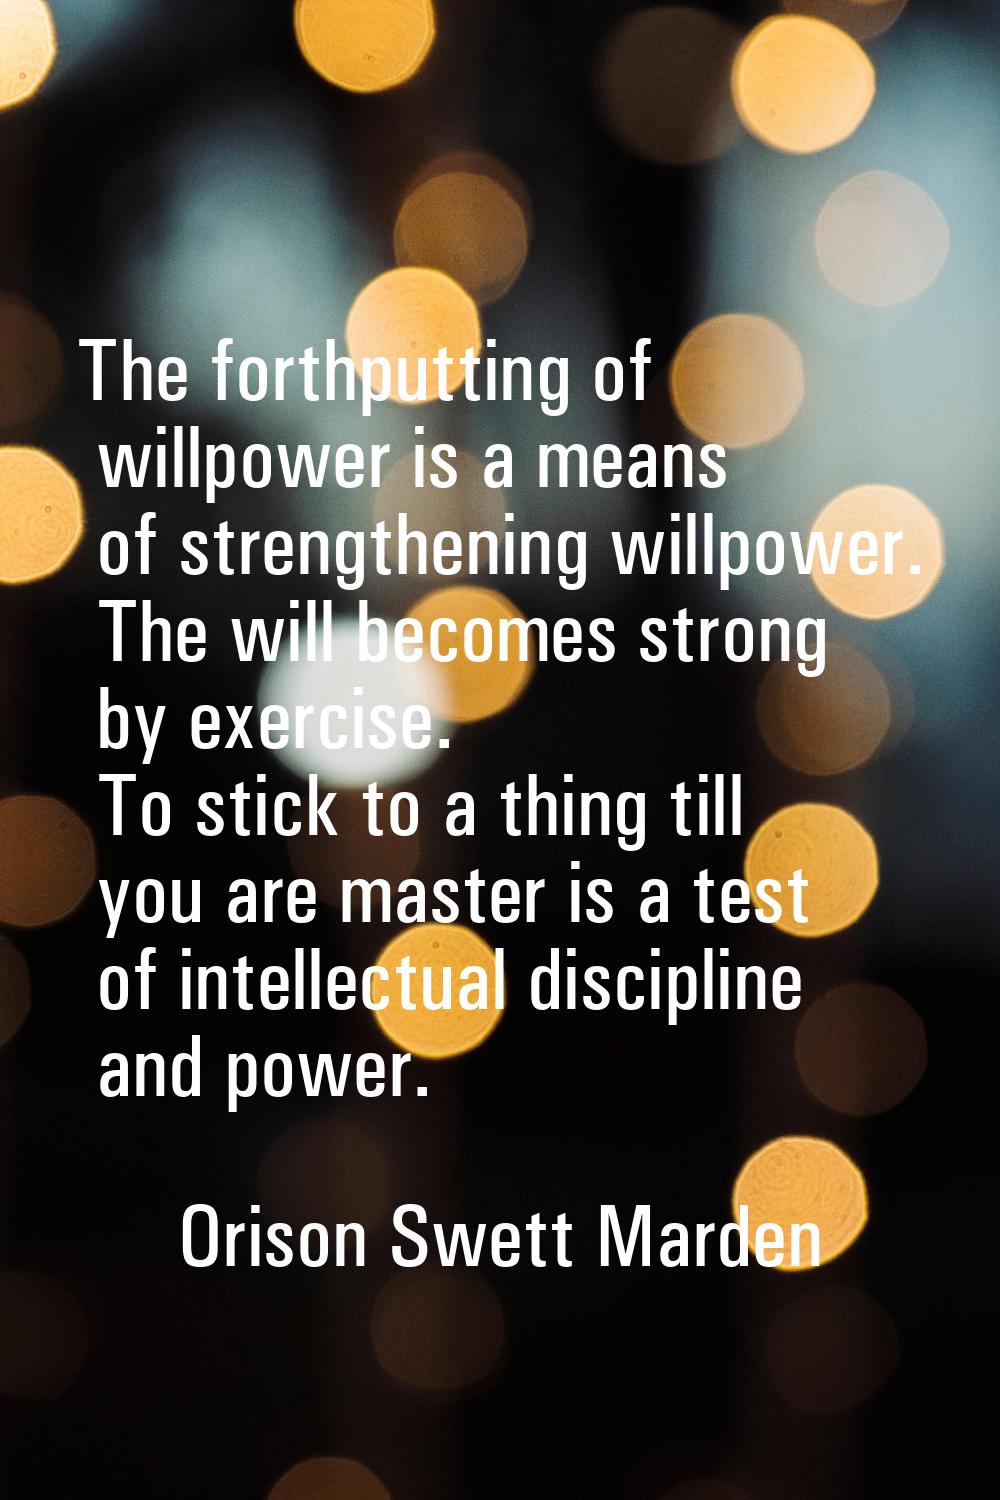 The forthputting of willpower is a means of strengthening willpower. The will becomes strong by exe